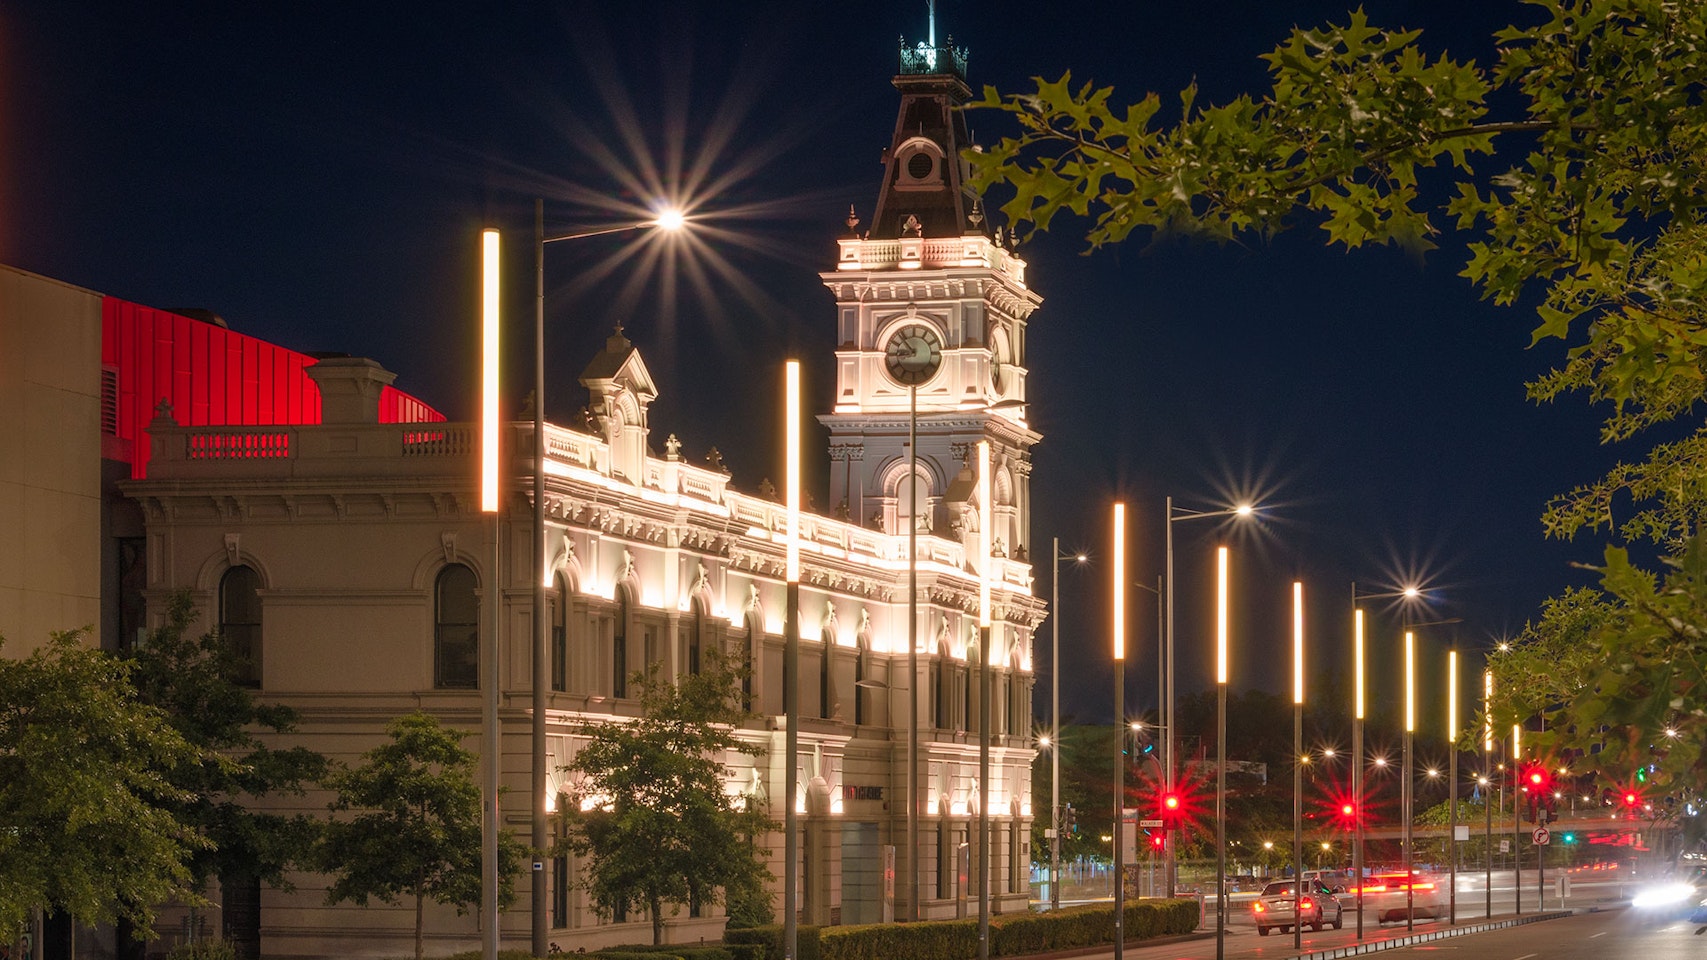 Latitude LED luminaire in application, installed on the façade of the former Dandenong Town Hall, now known as the Drum Theatre in Melbourne. Night view.